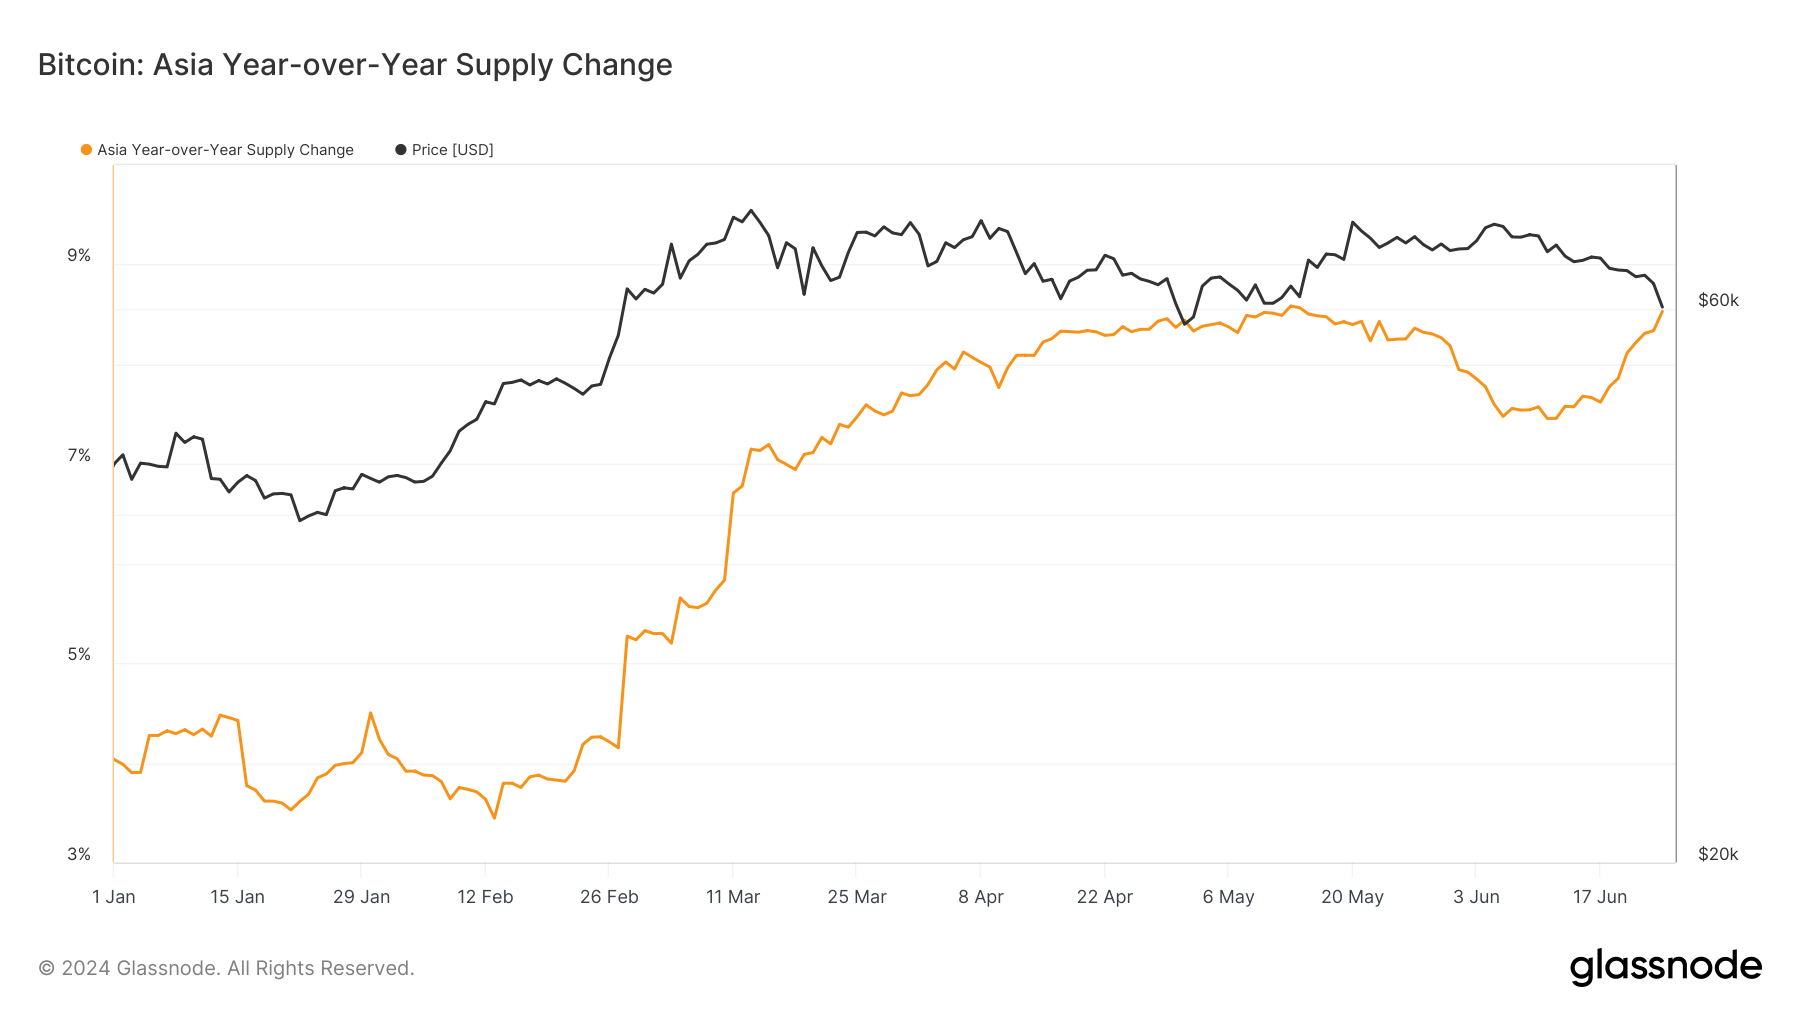 Bitcoin: Asia Year - over - Year Supply Change: (Source: Glassnode)